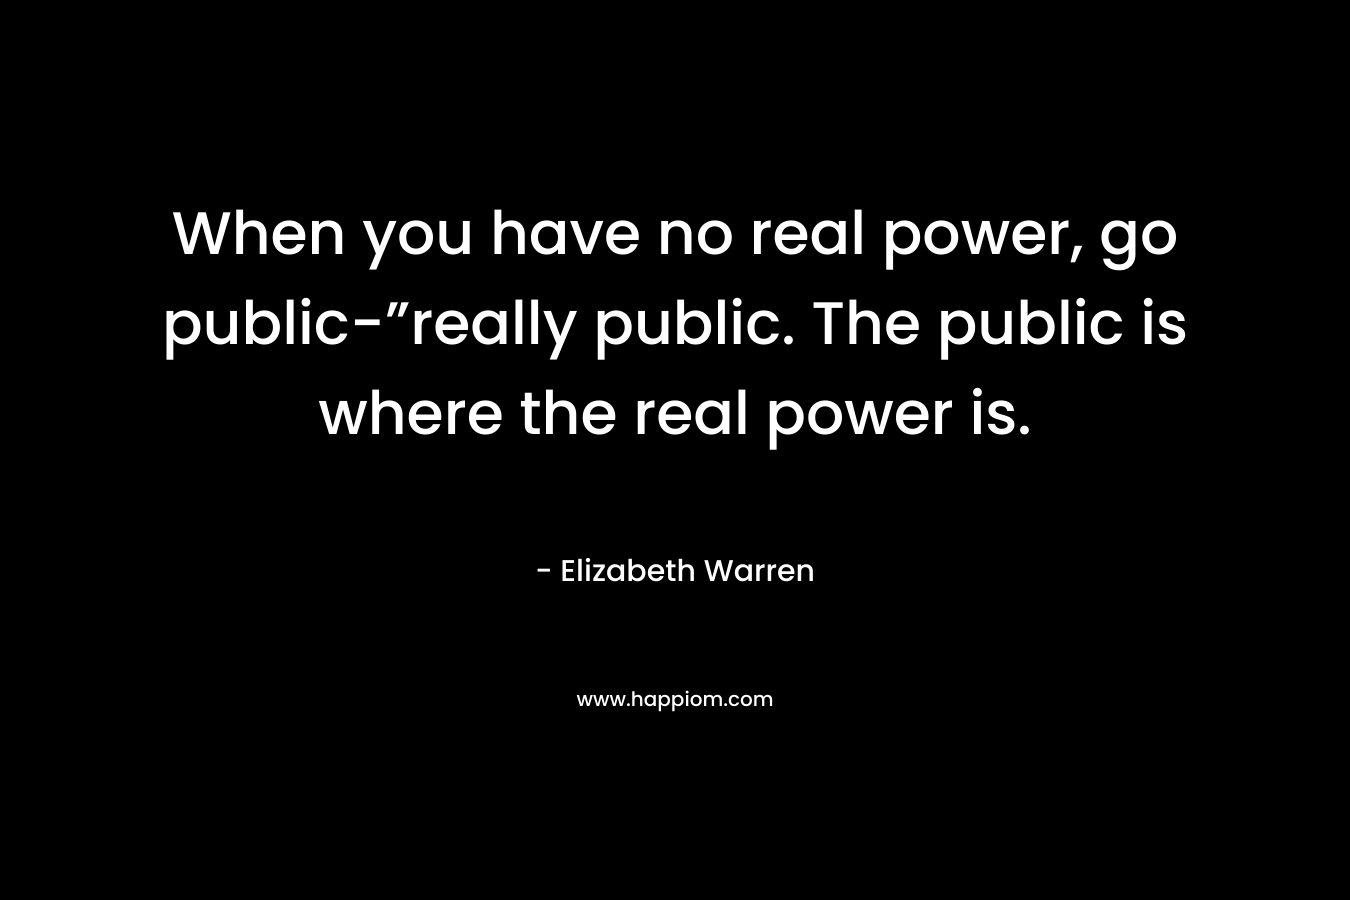 When you have no real power, go public-”really public. The public is where the real power is.